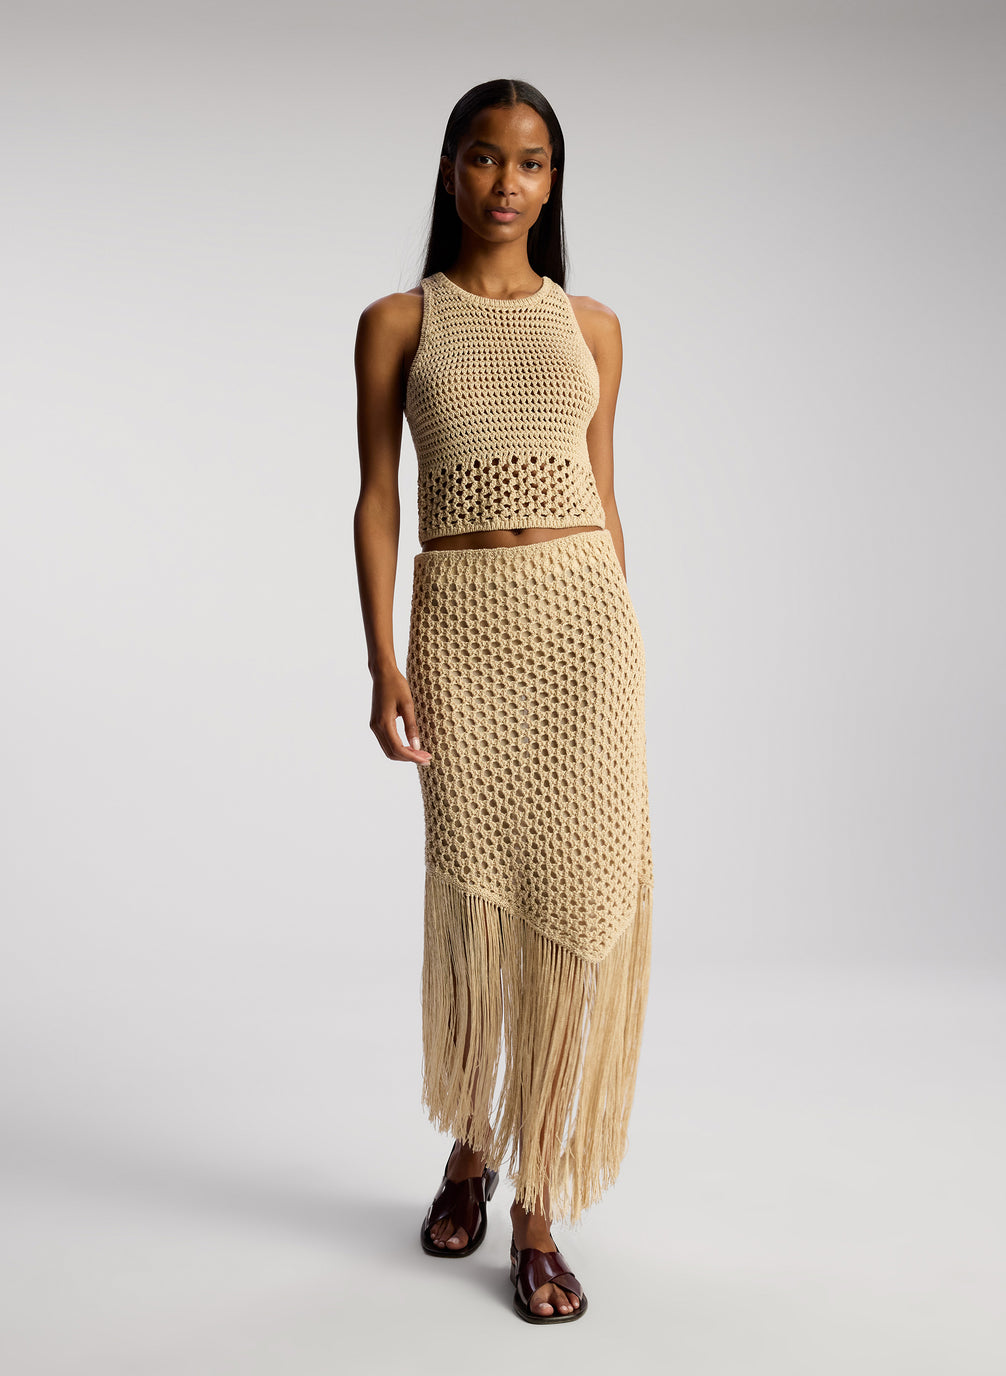 front view of woman wearing tan crochet top and skirt set